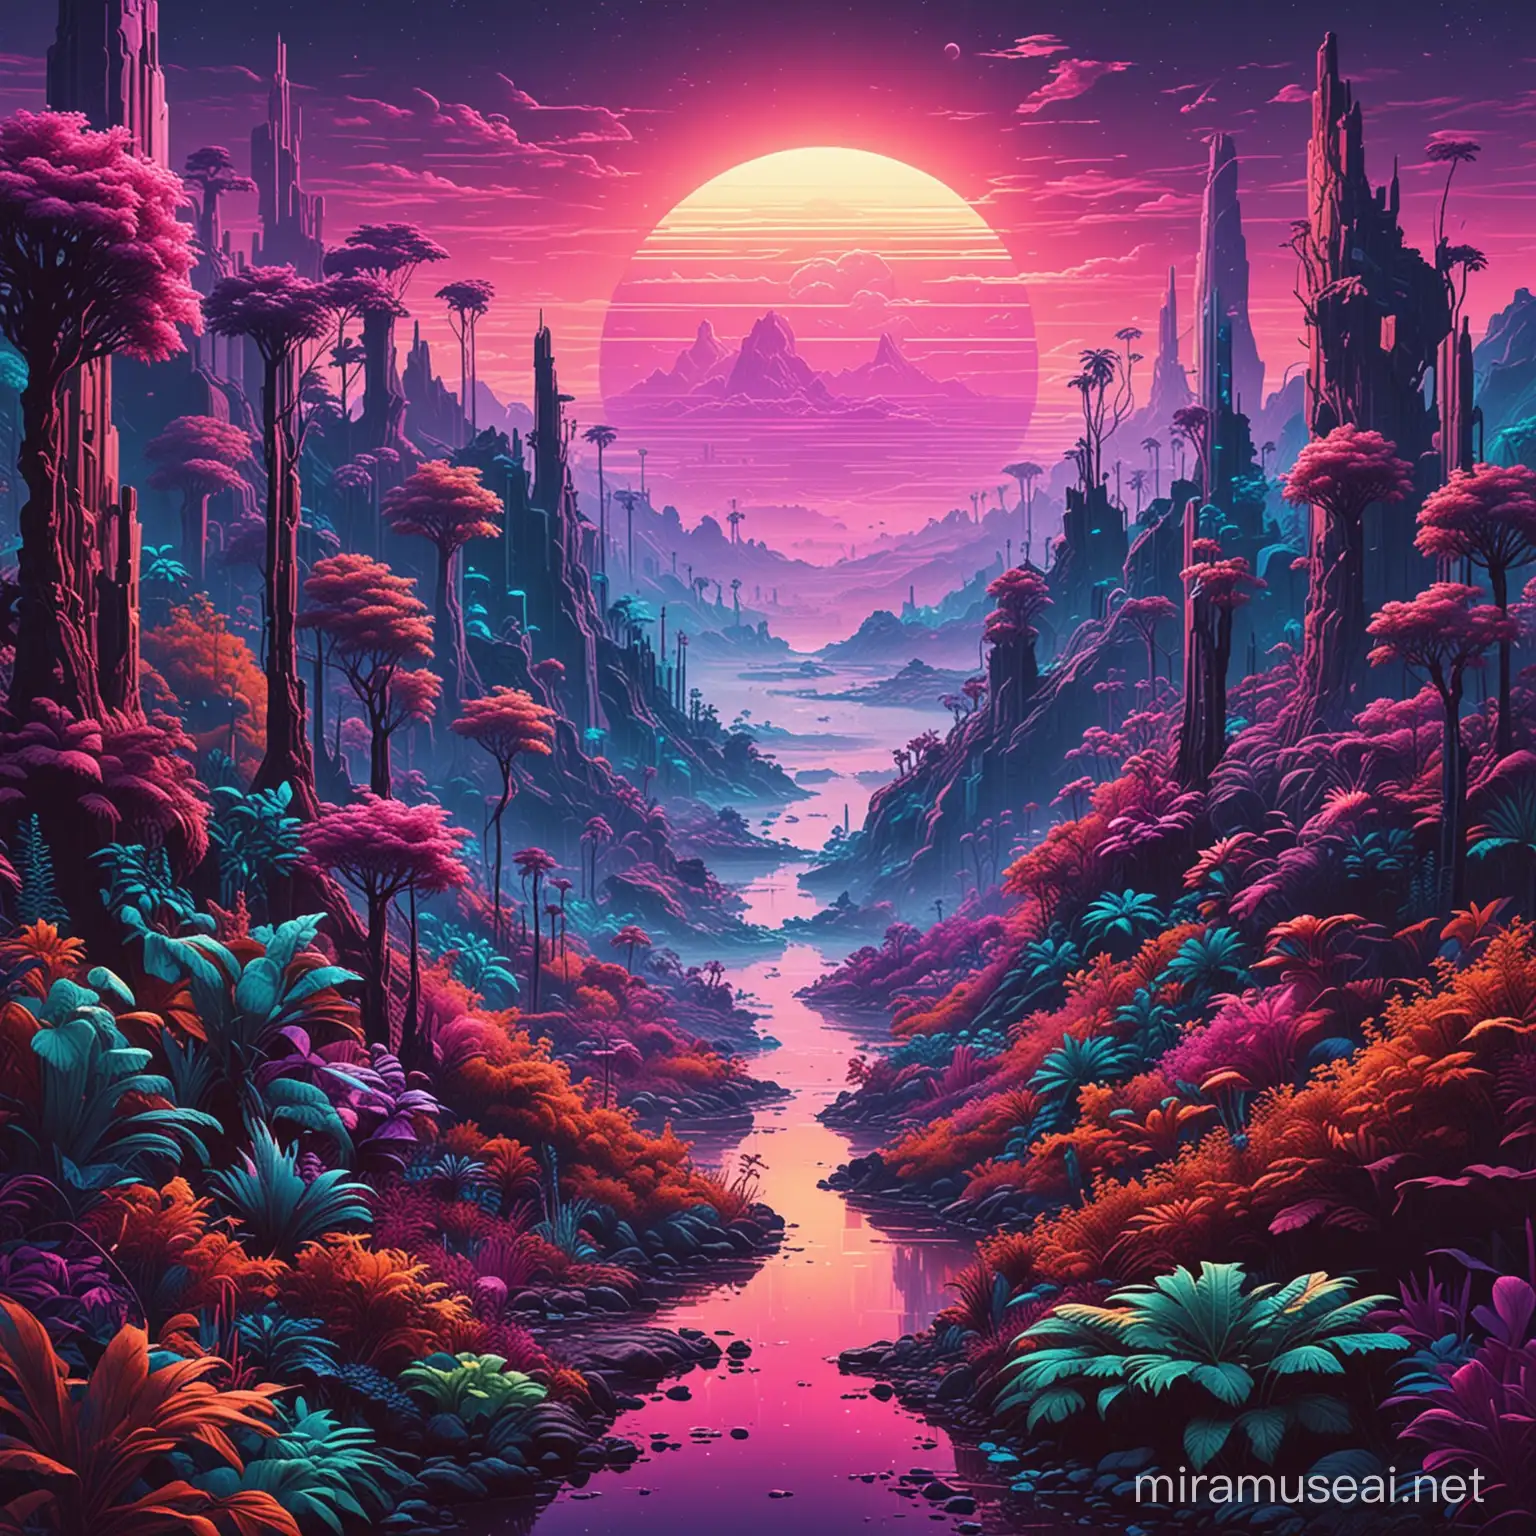 Diverse Microclimates in Vibrant Synthwave Scene